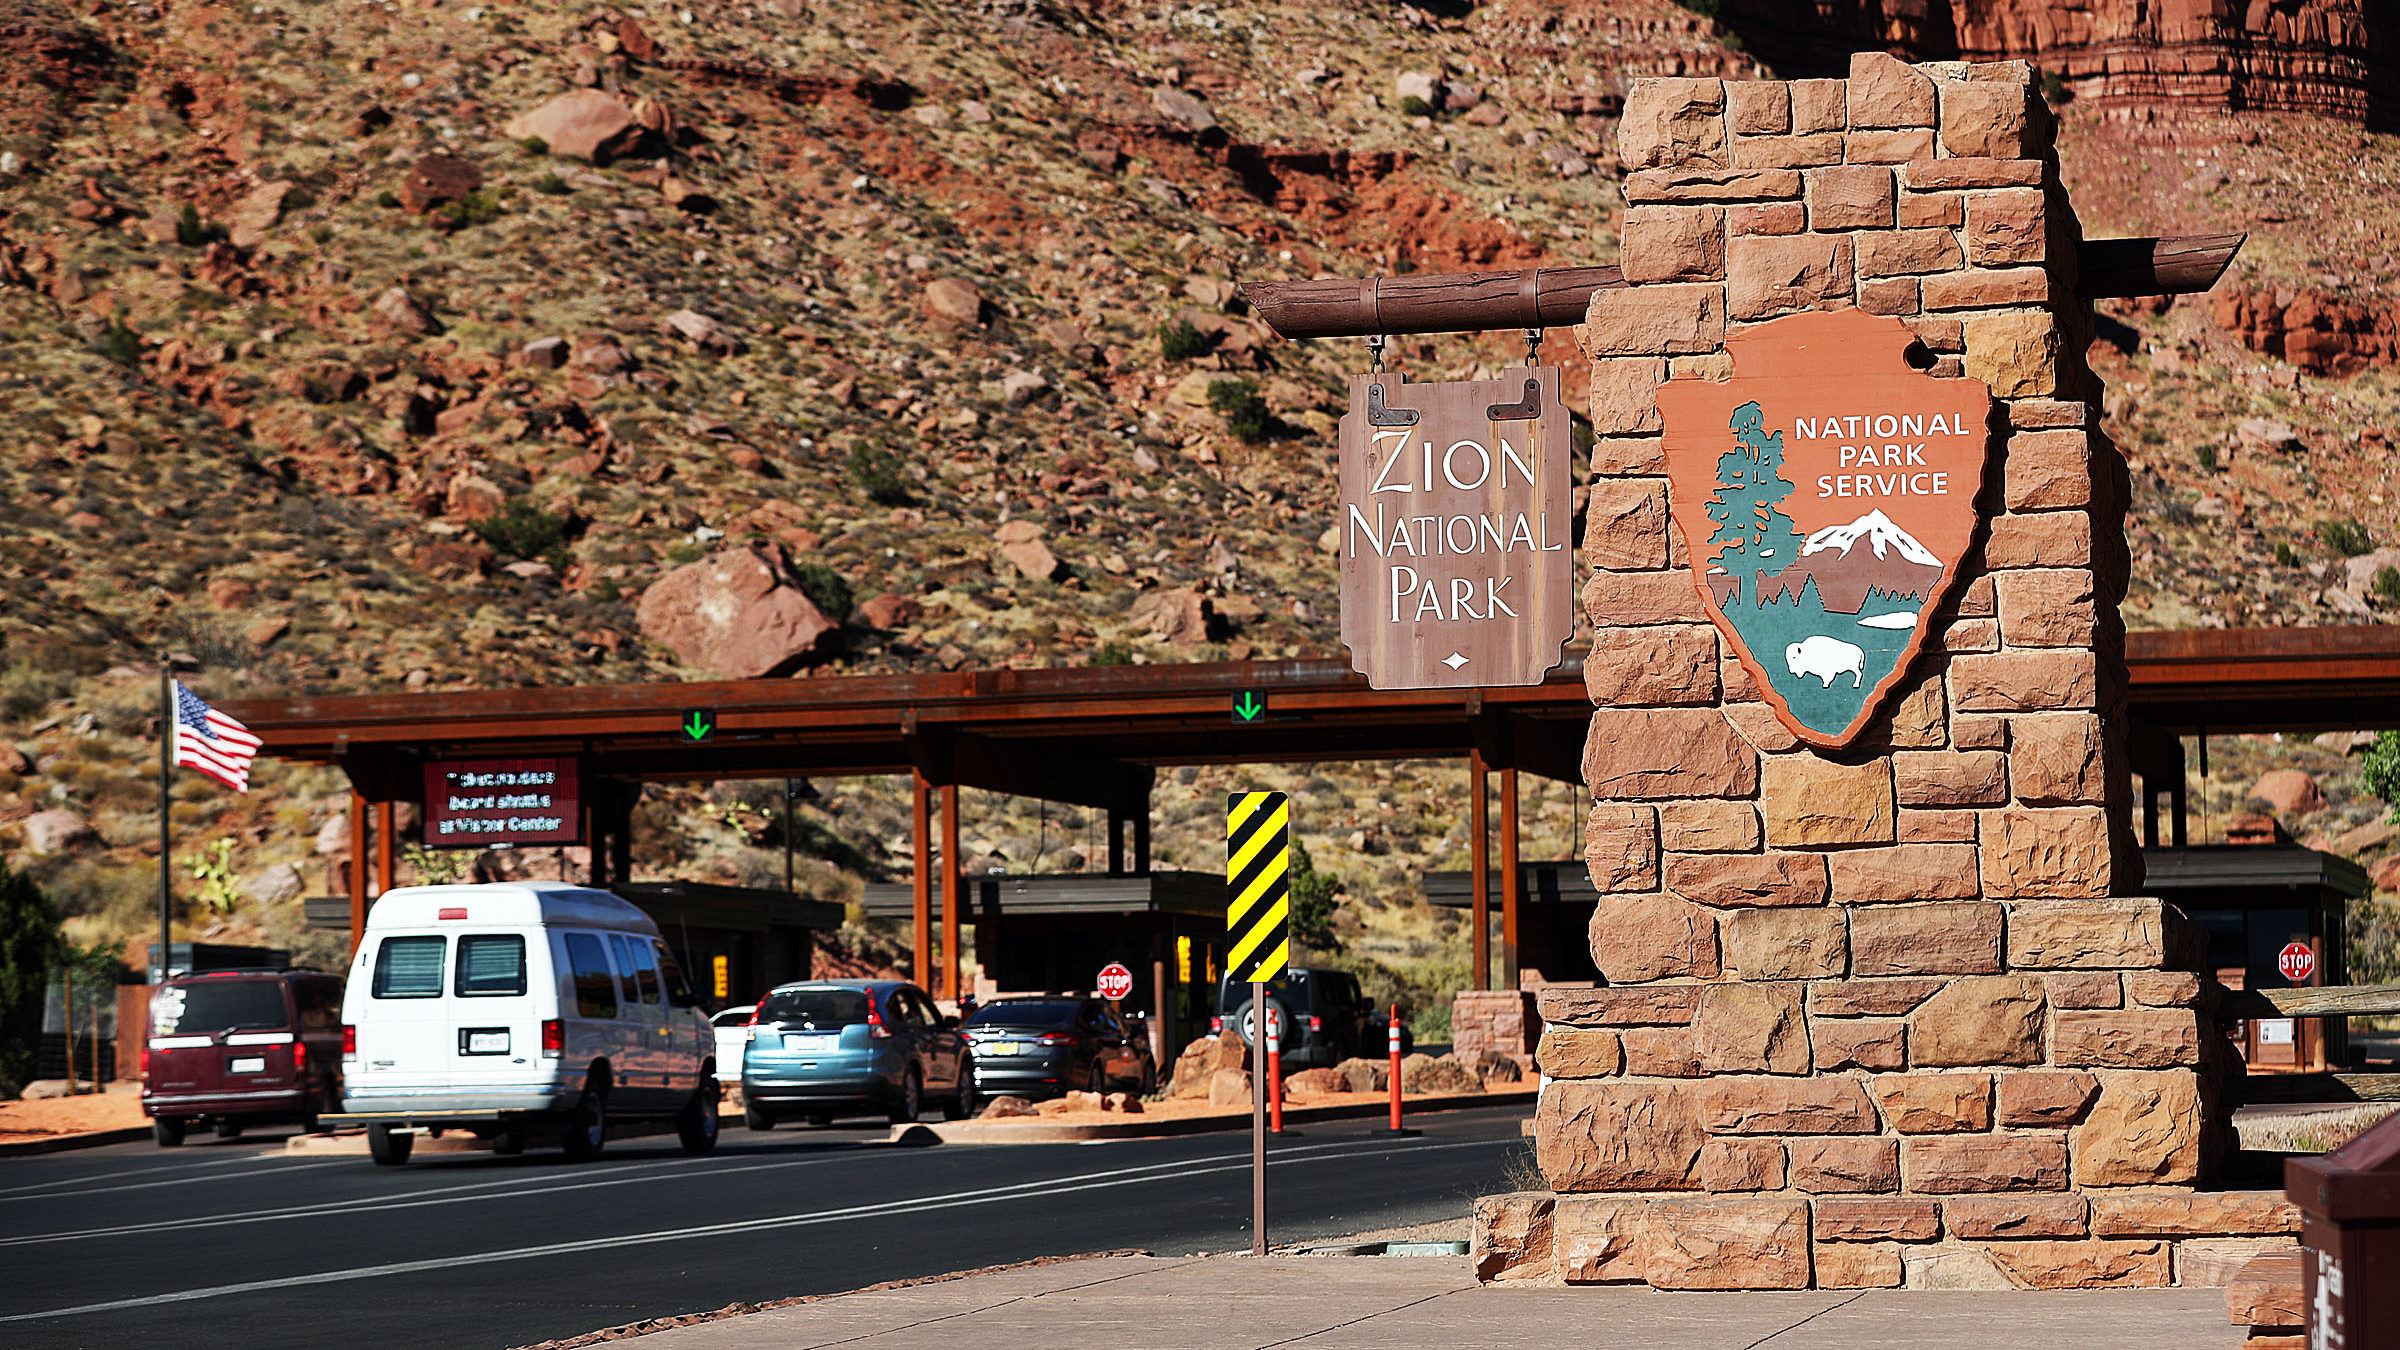 Officials at Zion National Park say a search and resuc mission was conducted Friday after reports o...